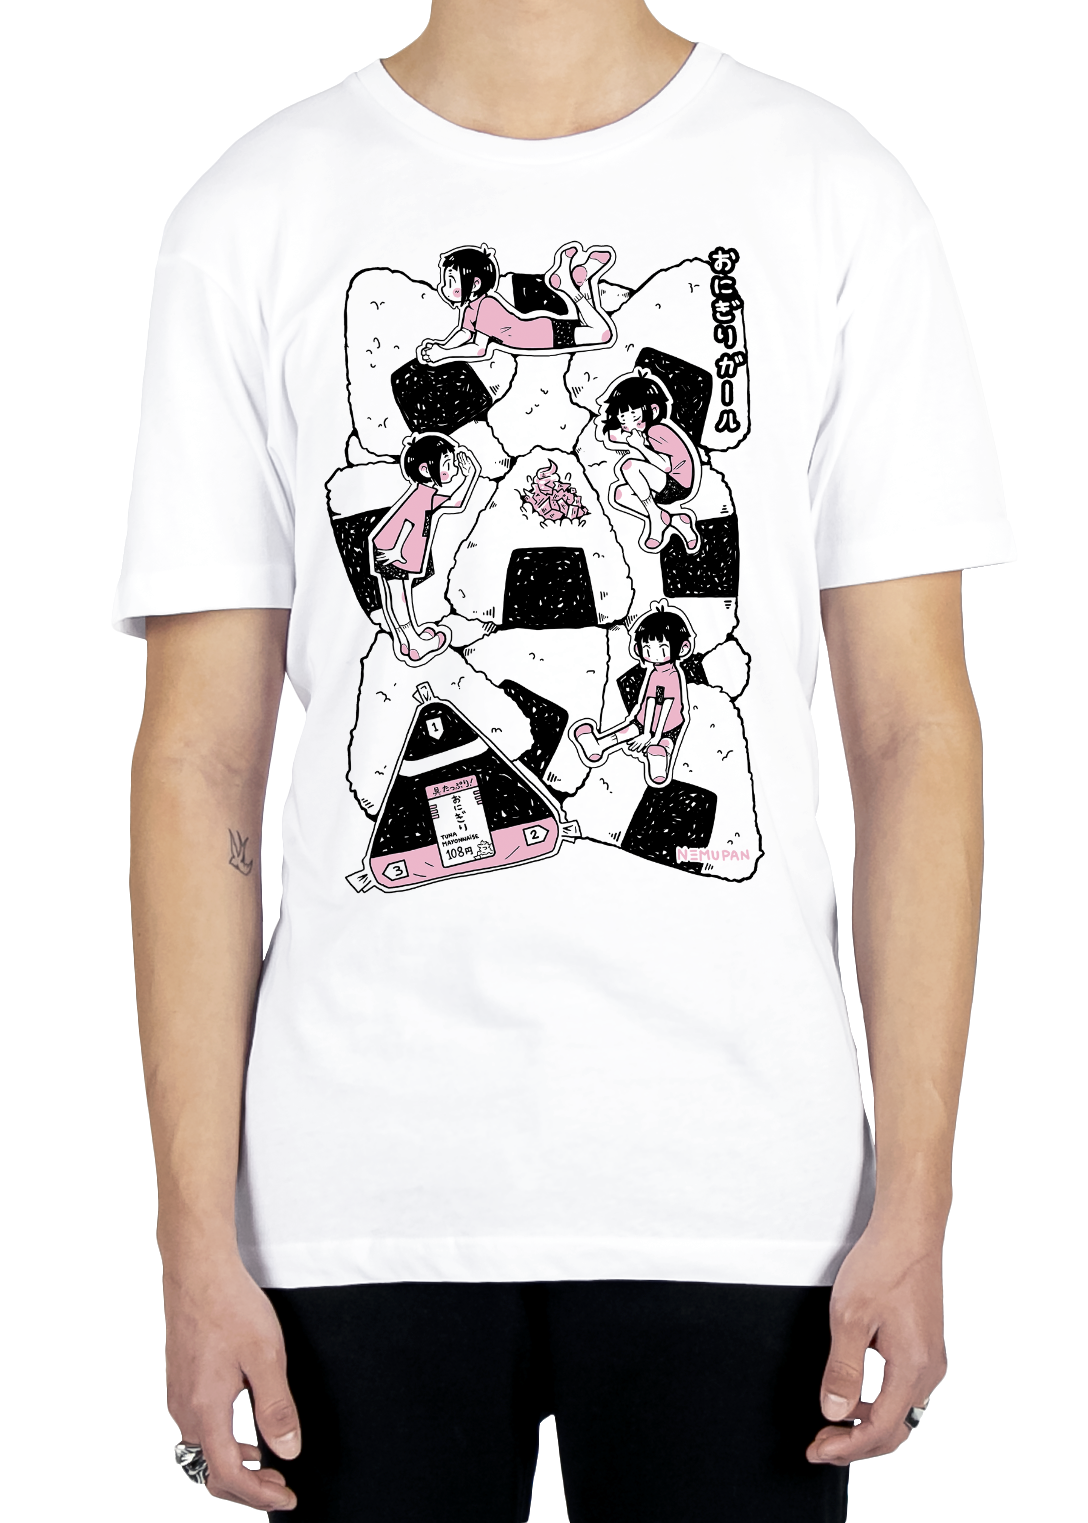 Experience Aesthetic and Vaporwave fashion with Vapor95's Graphic Tees |  Always Cute Tee